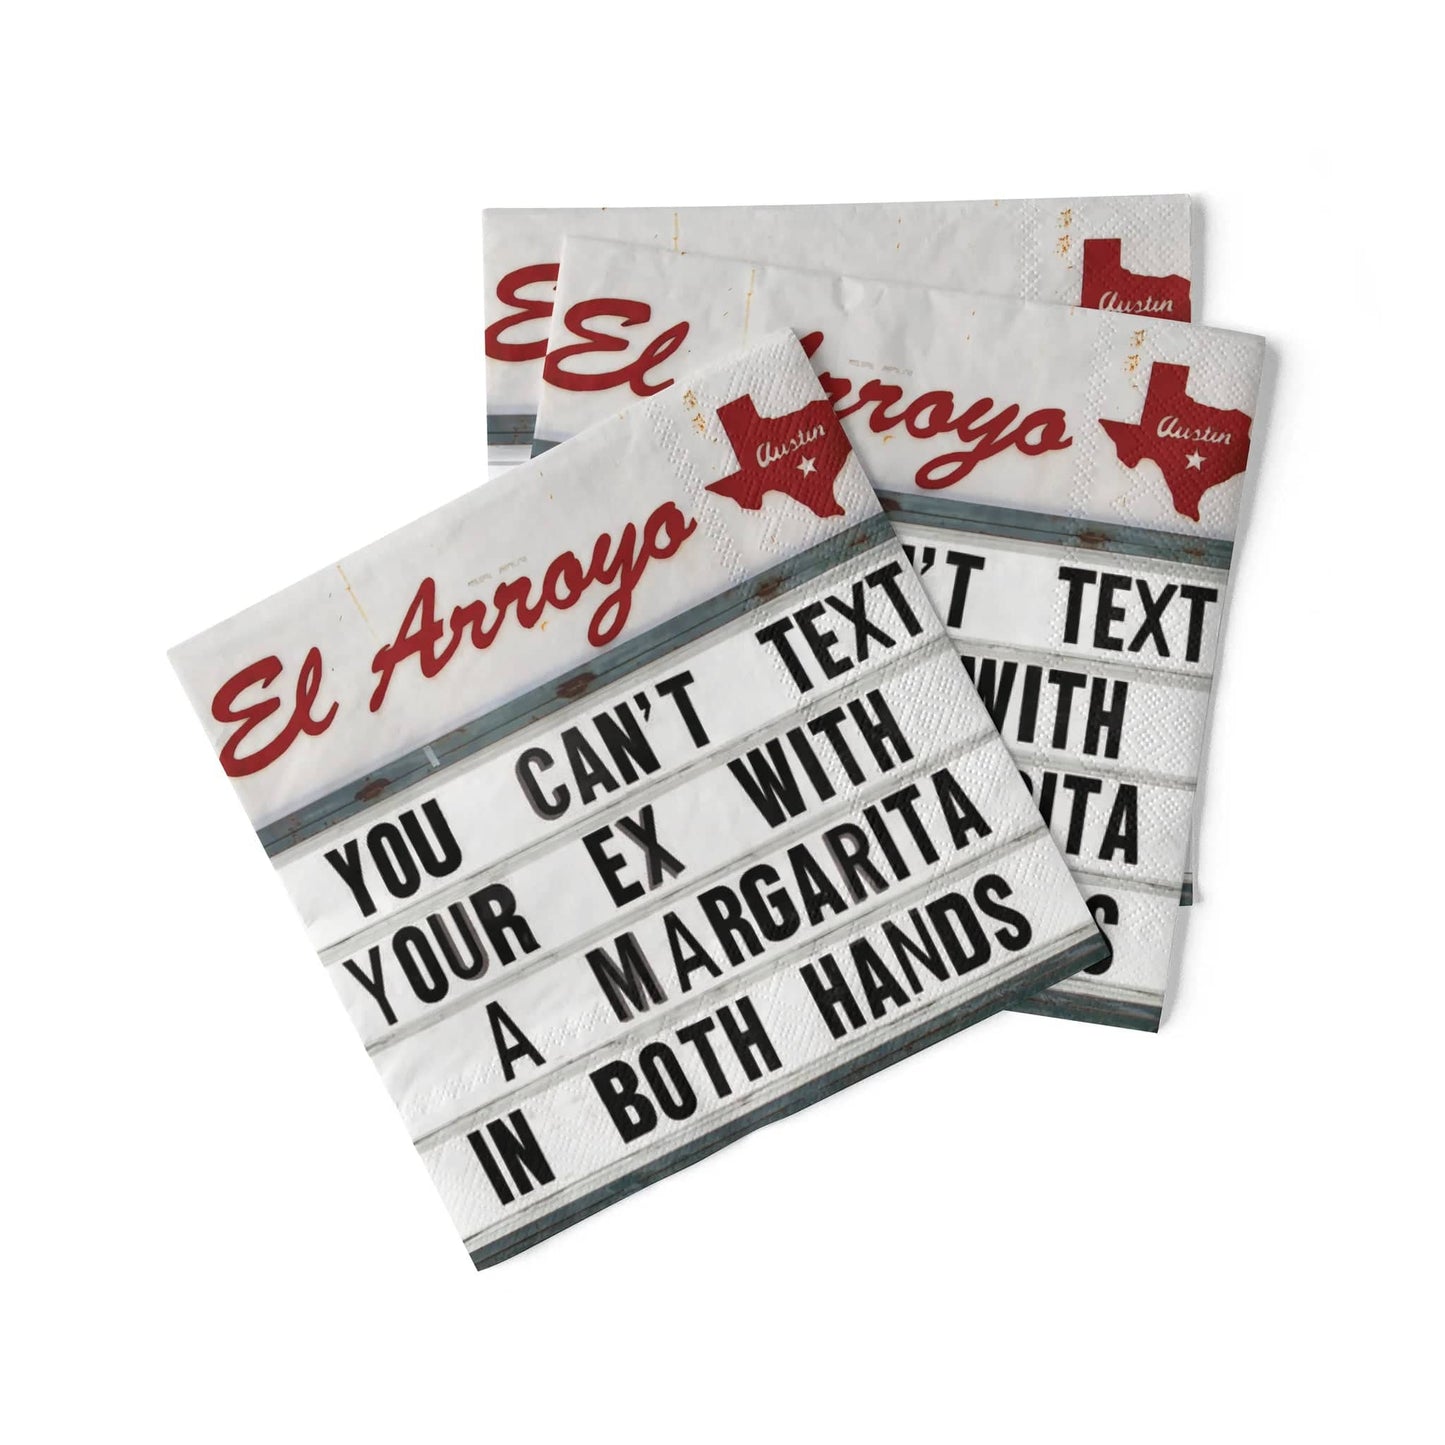 El Arroyo - Cocktail Napkins (Pack of 20) - Can't Text Your Ex - Findlay Rowe Designs